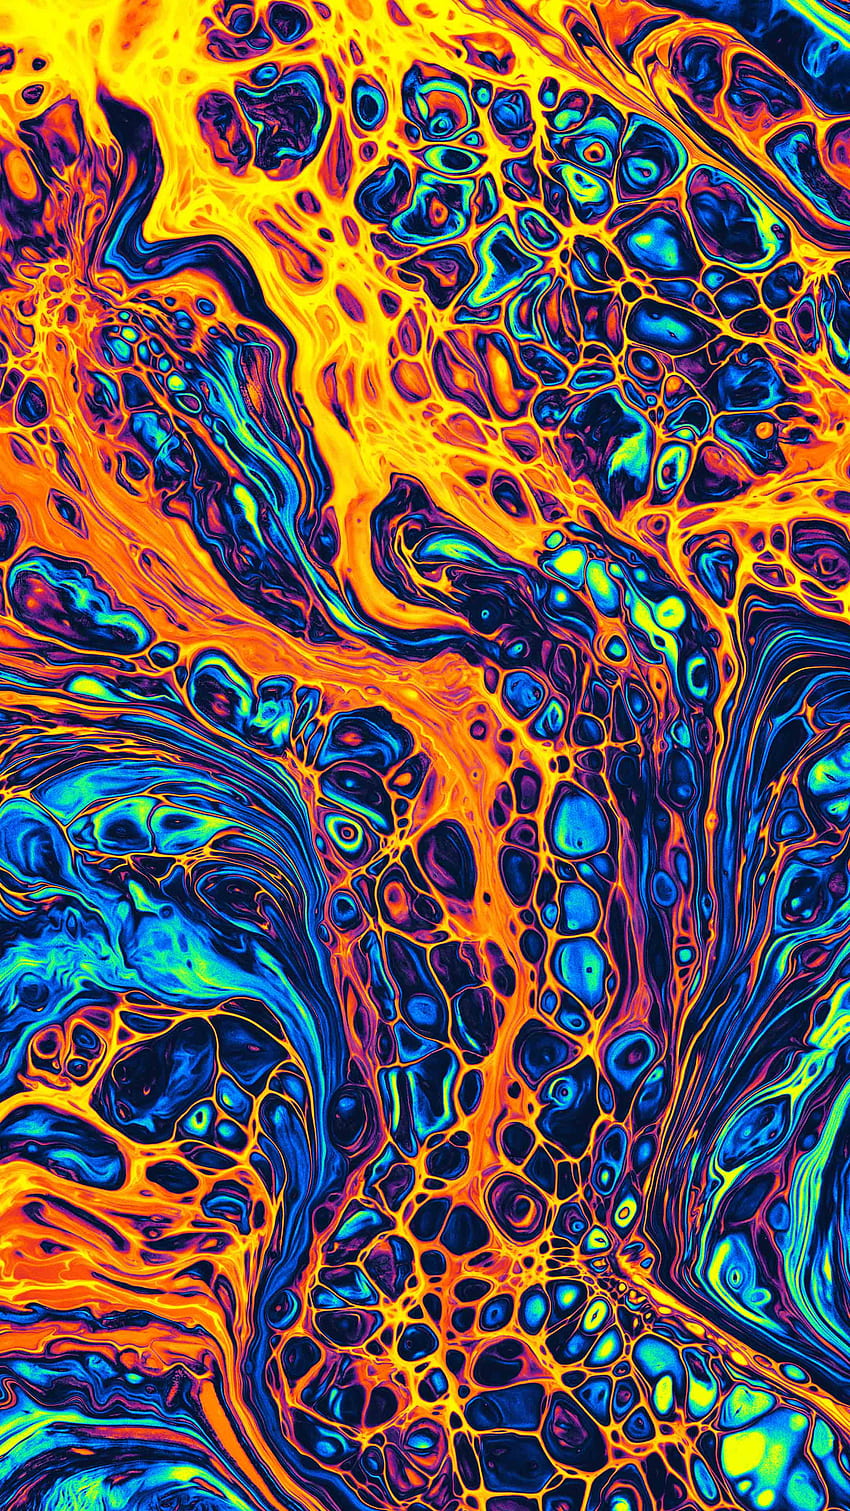 Here are some from my collection, enjoy! If you guys want more like this let me know, will post more next time! ✌️, Liquid Fusion HD phone wallpaper